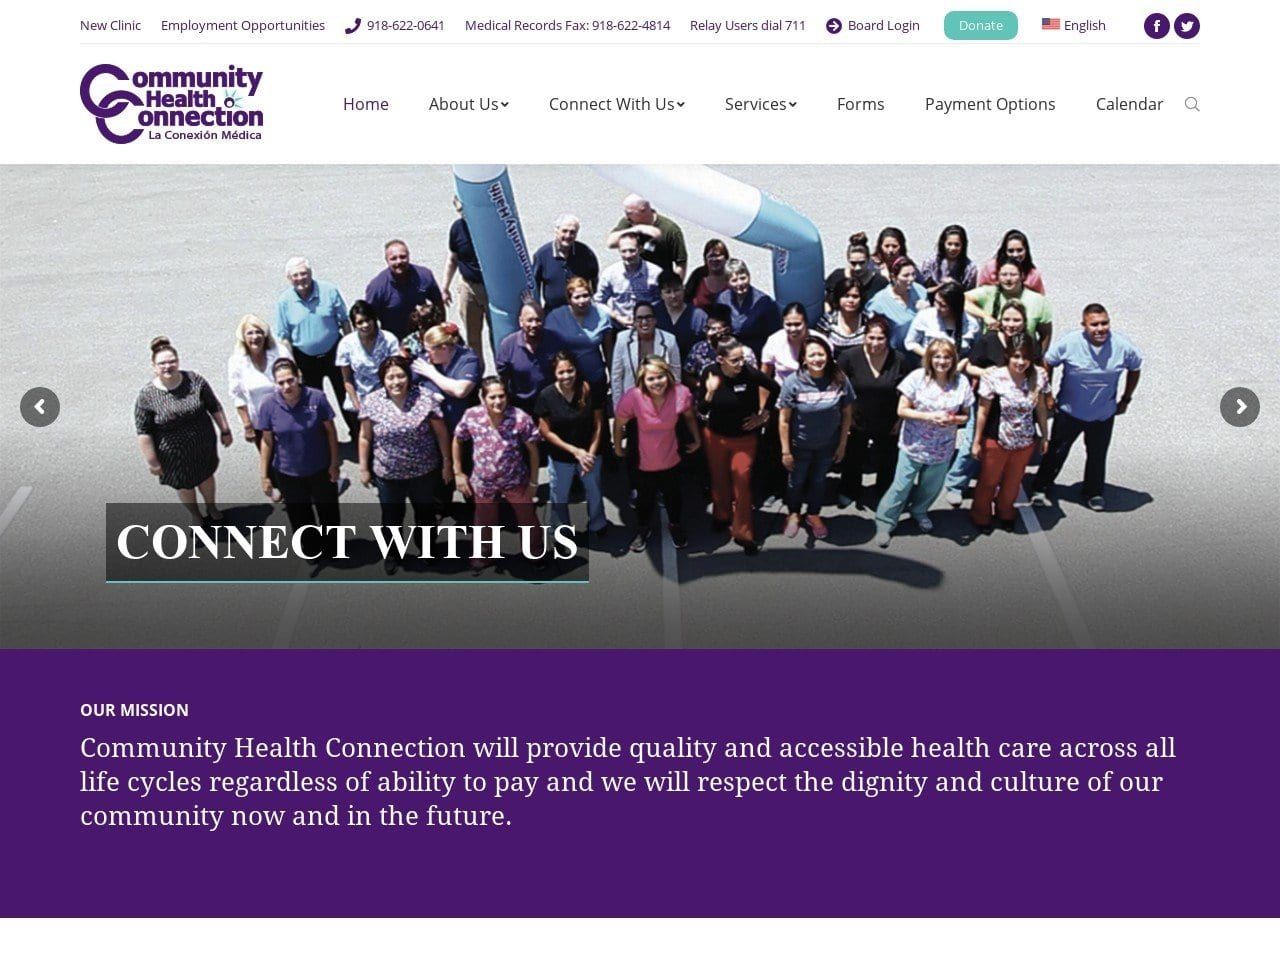 Community Health Connection/La Conexic B3n Mc B)Di Website Screenshot from communityhealthconnection.org